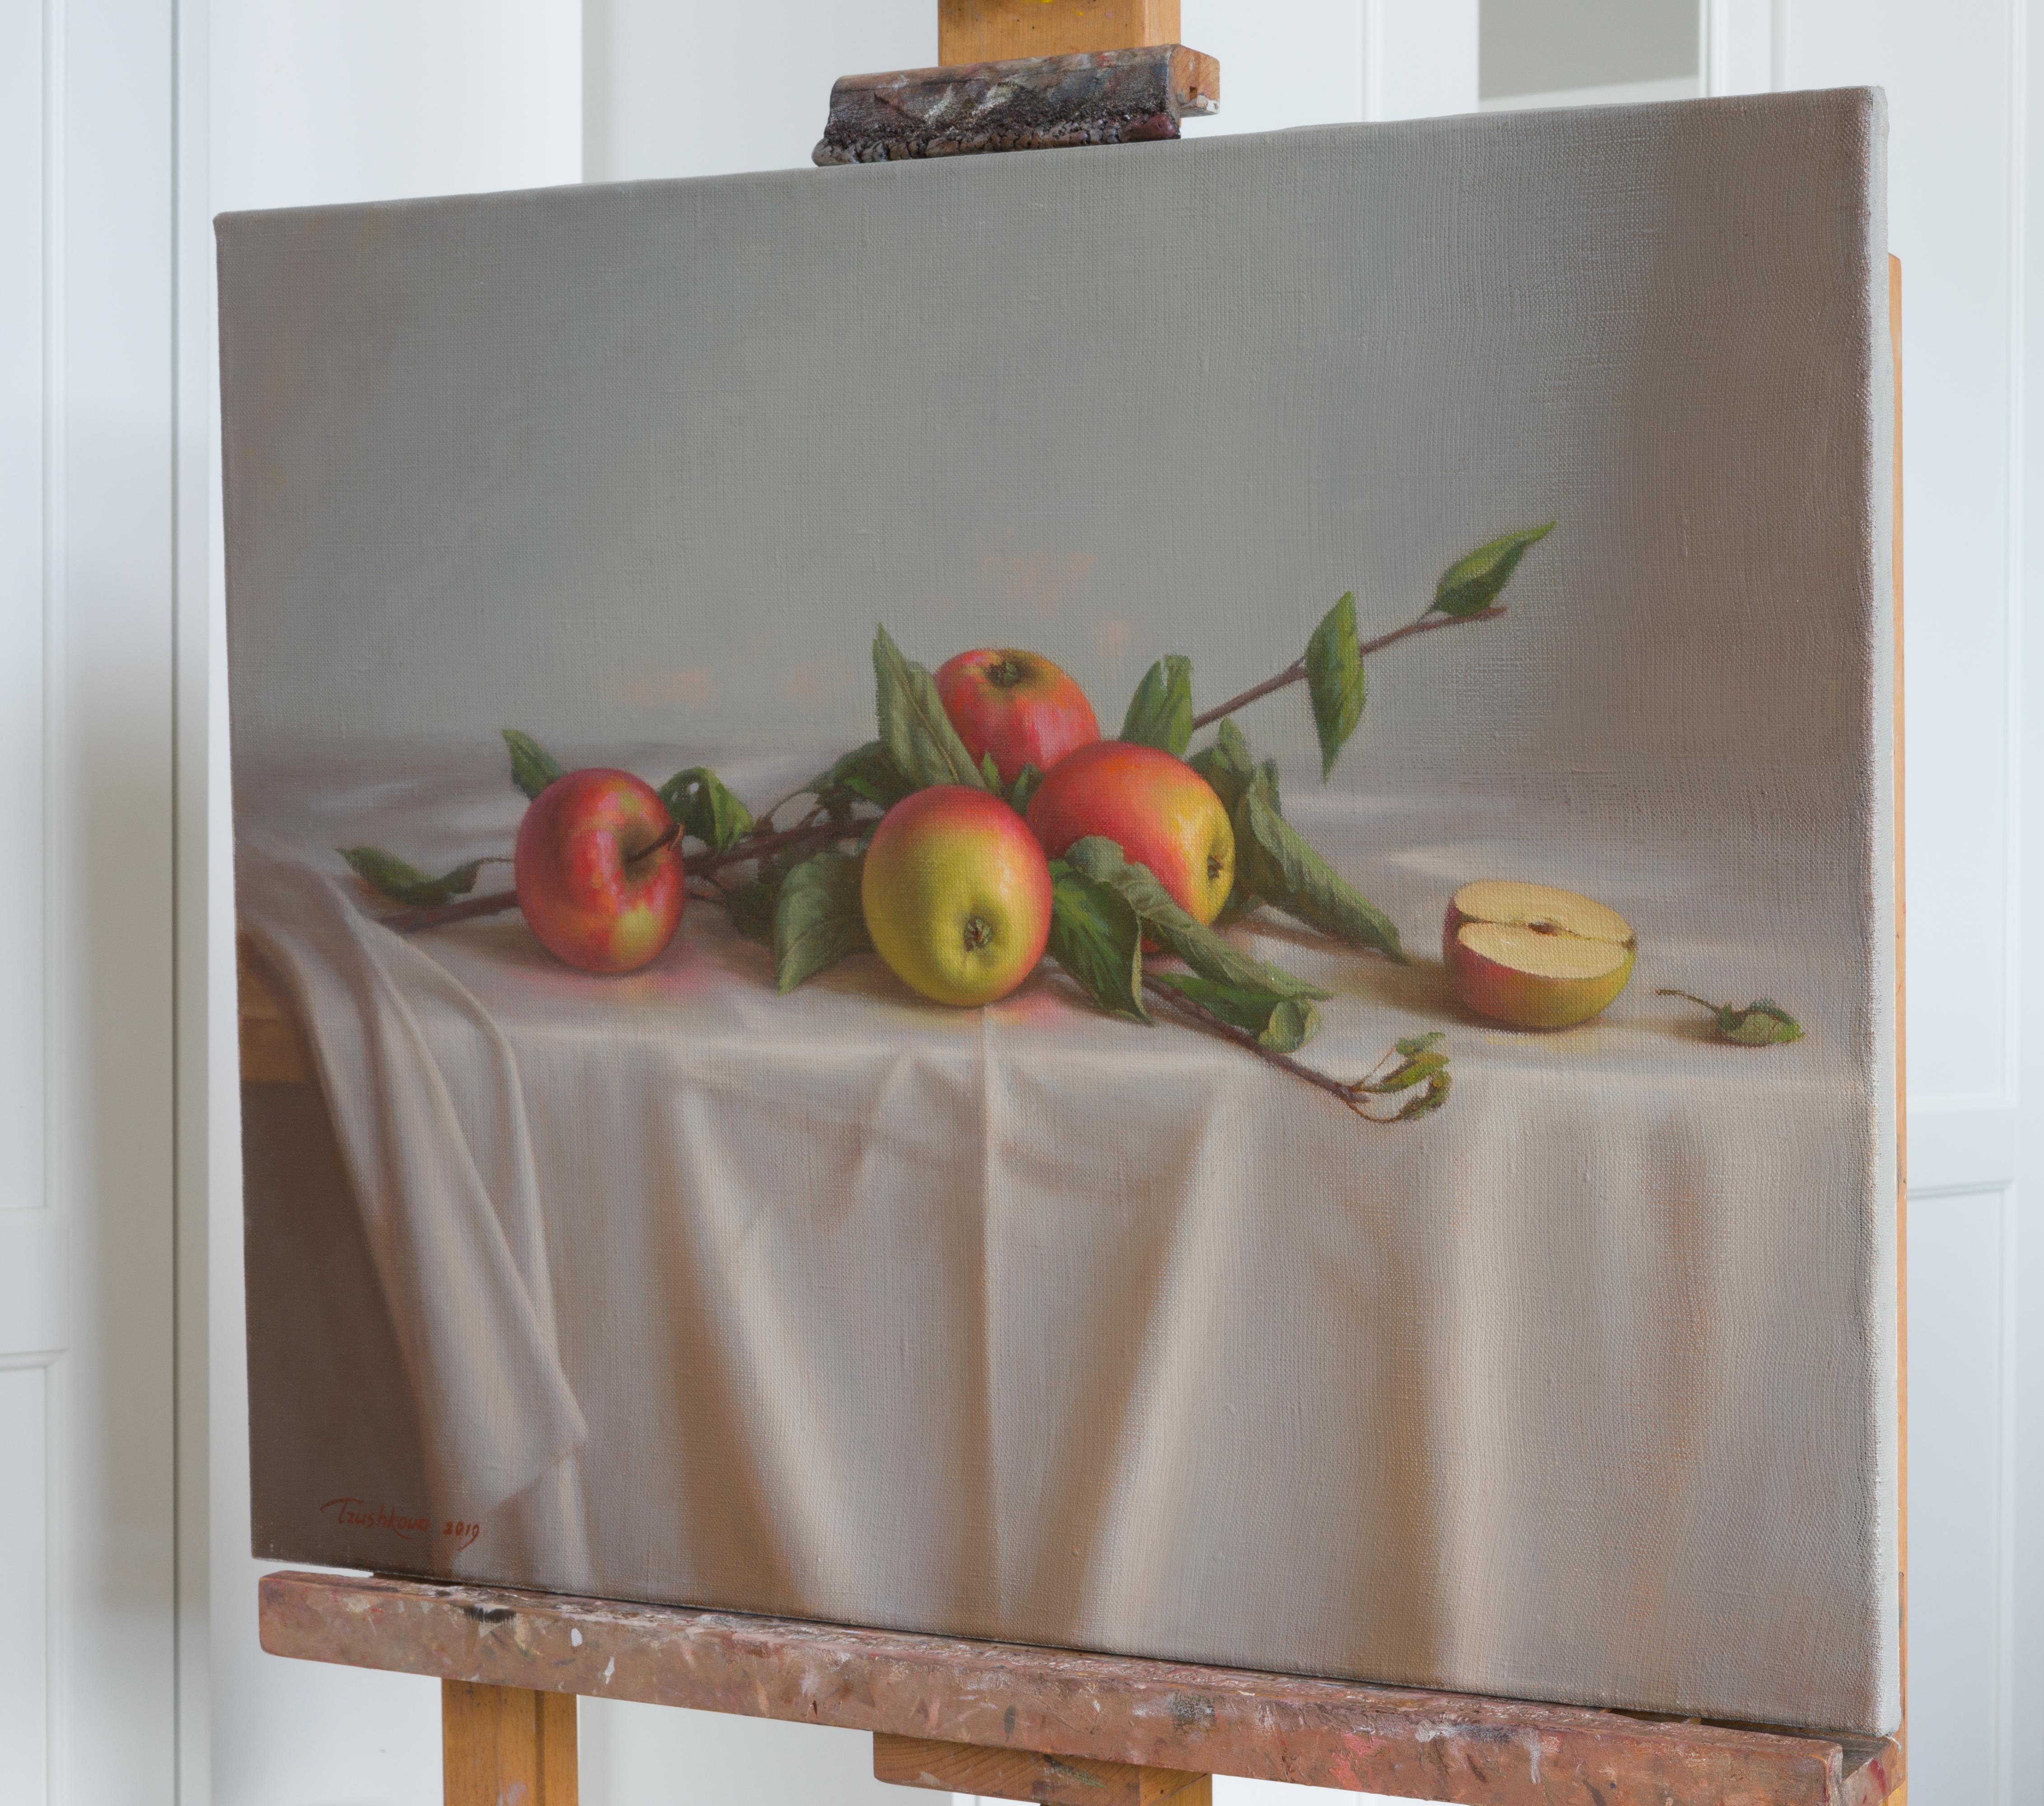 The style of this painting is inspired by the Holland masters of the 17th century. Painted with great precision and a keen eye for detail, this work exudes contemporary realism. I tried to find the color harmony of bright red apples and a silvery